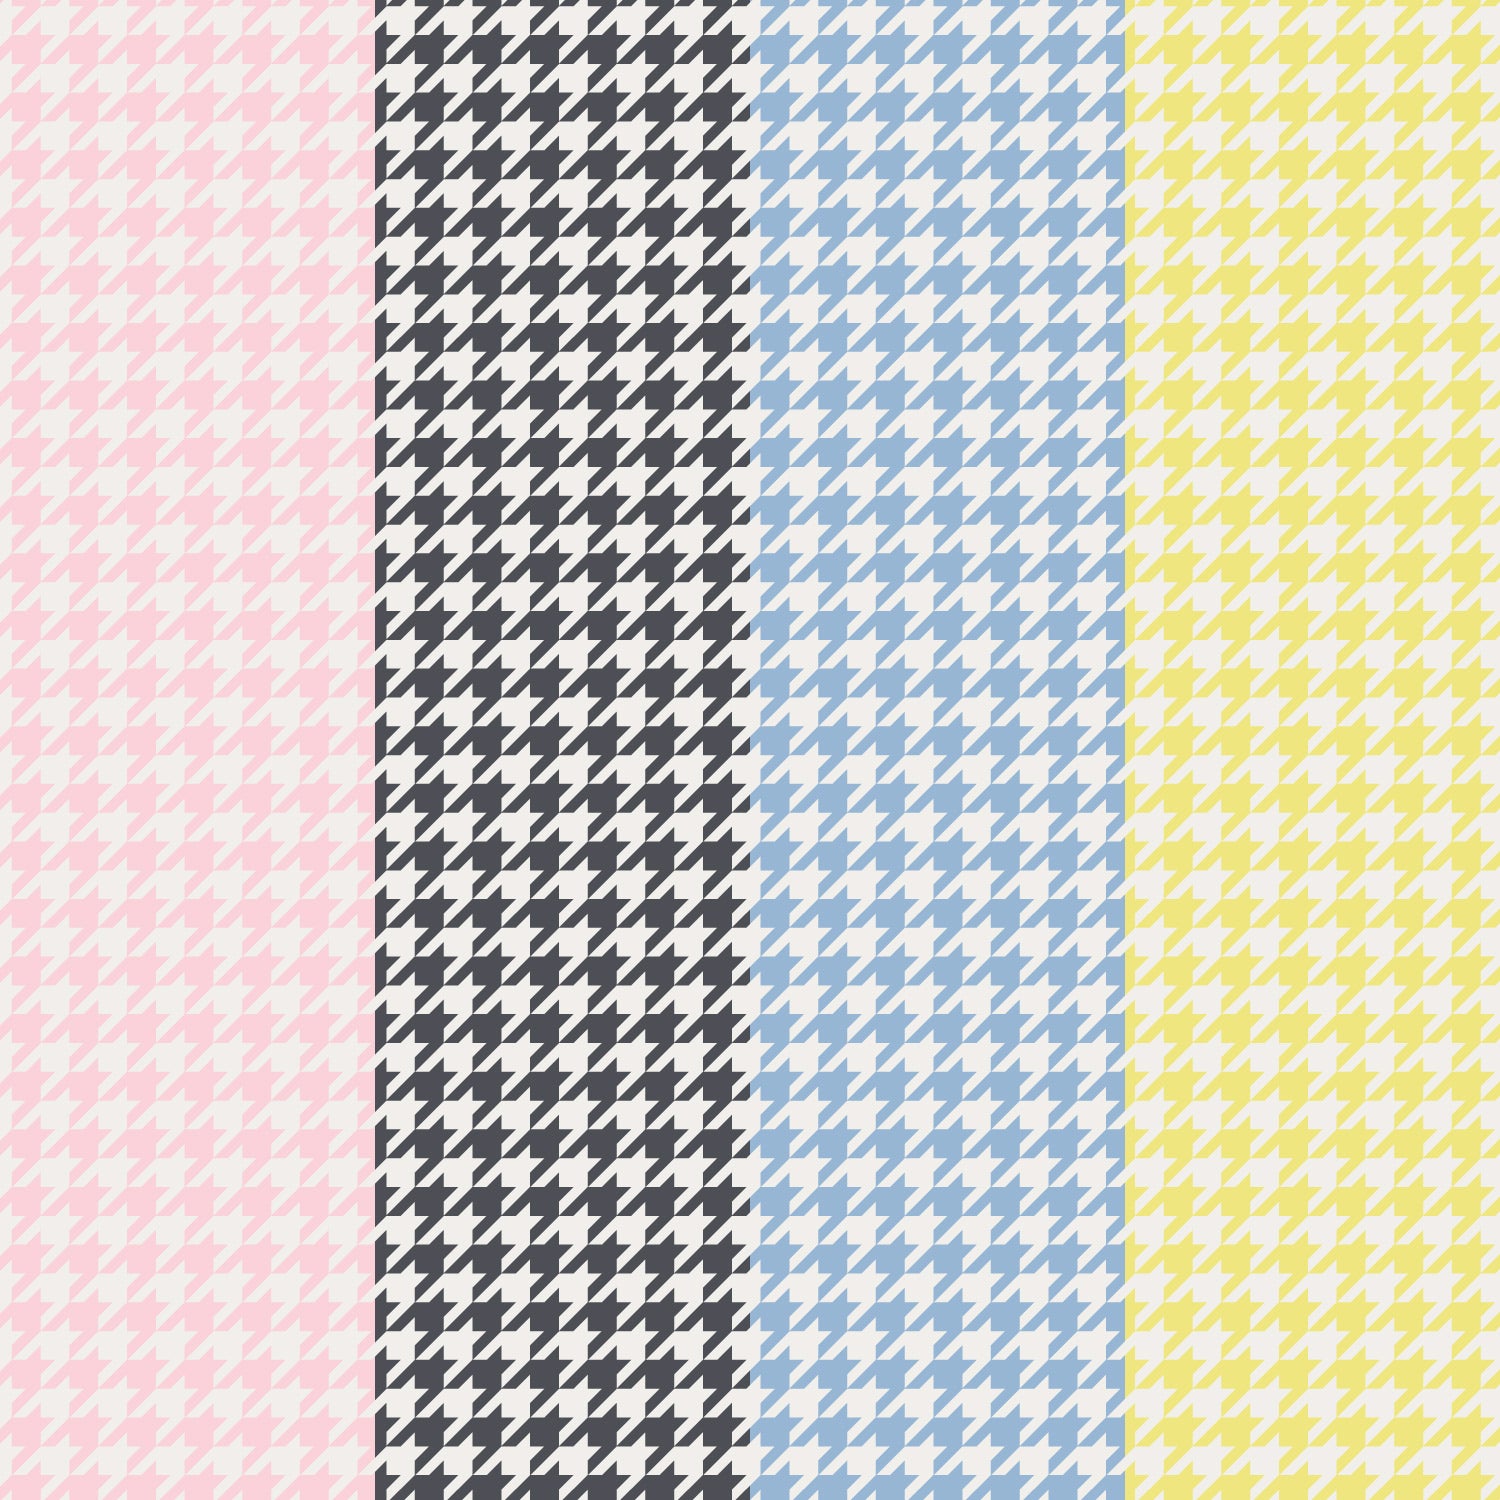 History of Houndstooth – Plumager, Inc.